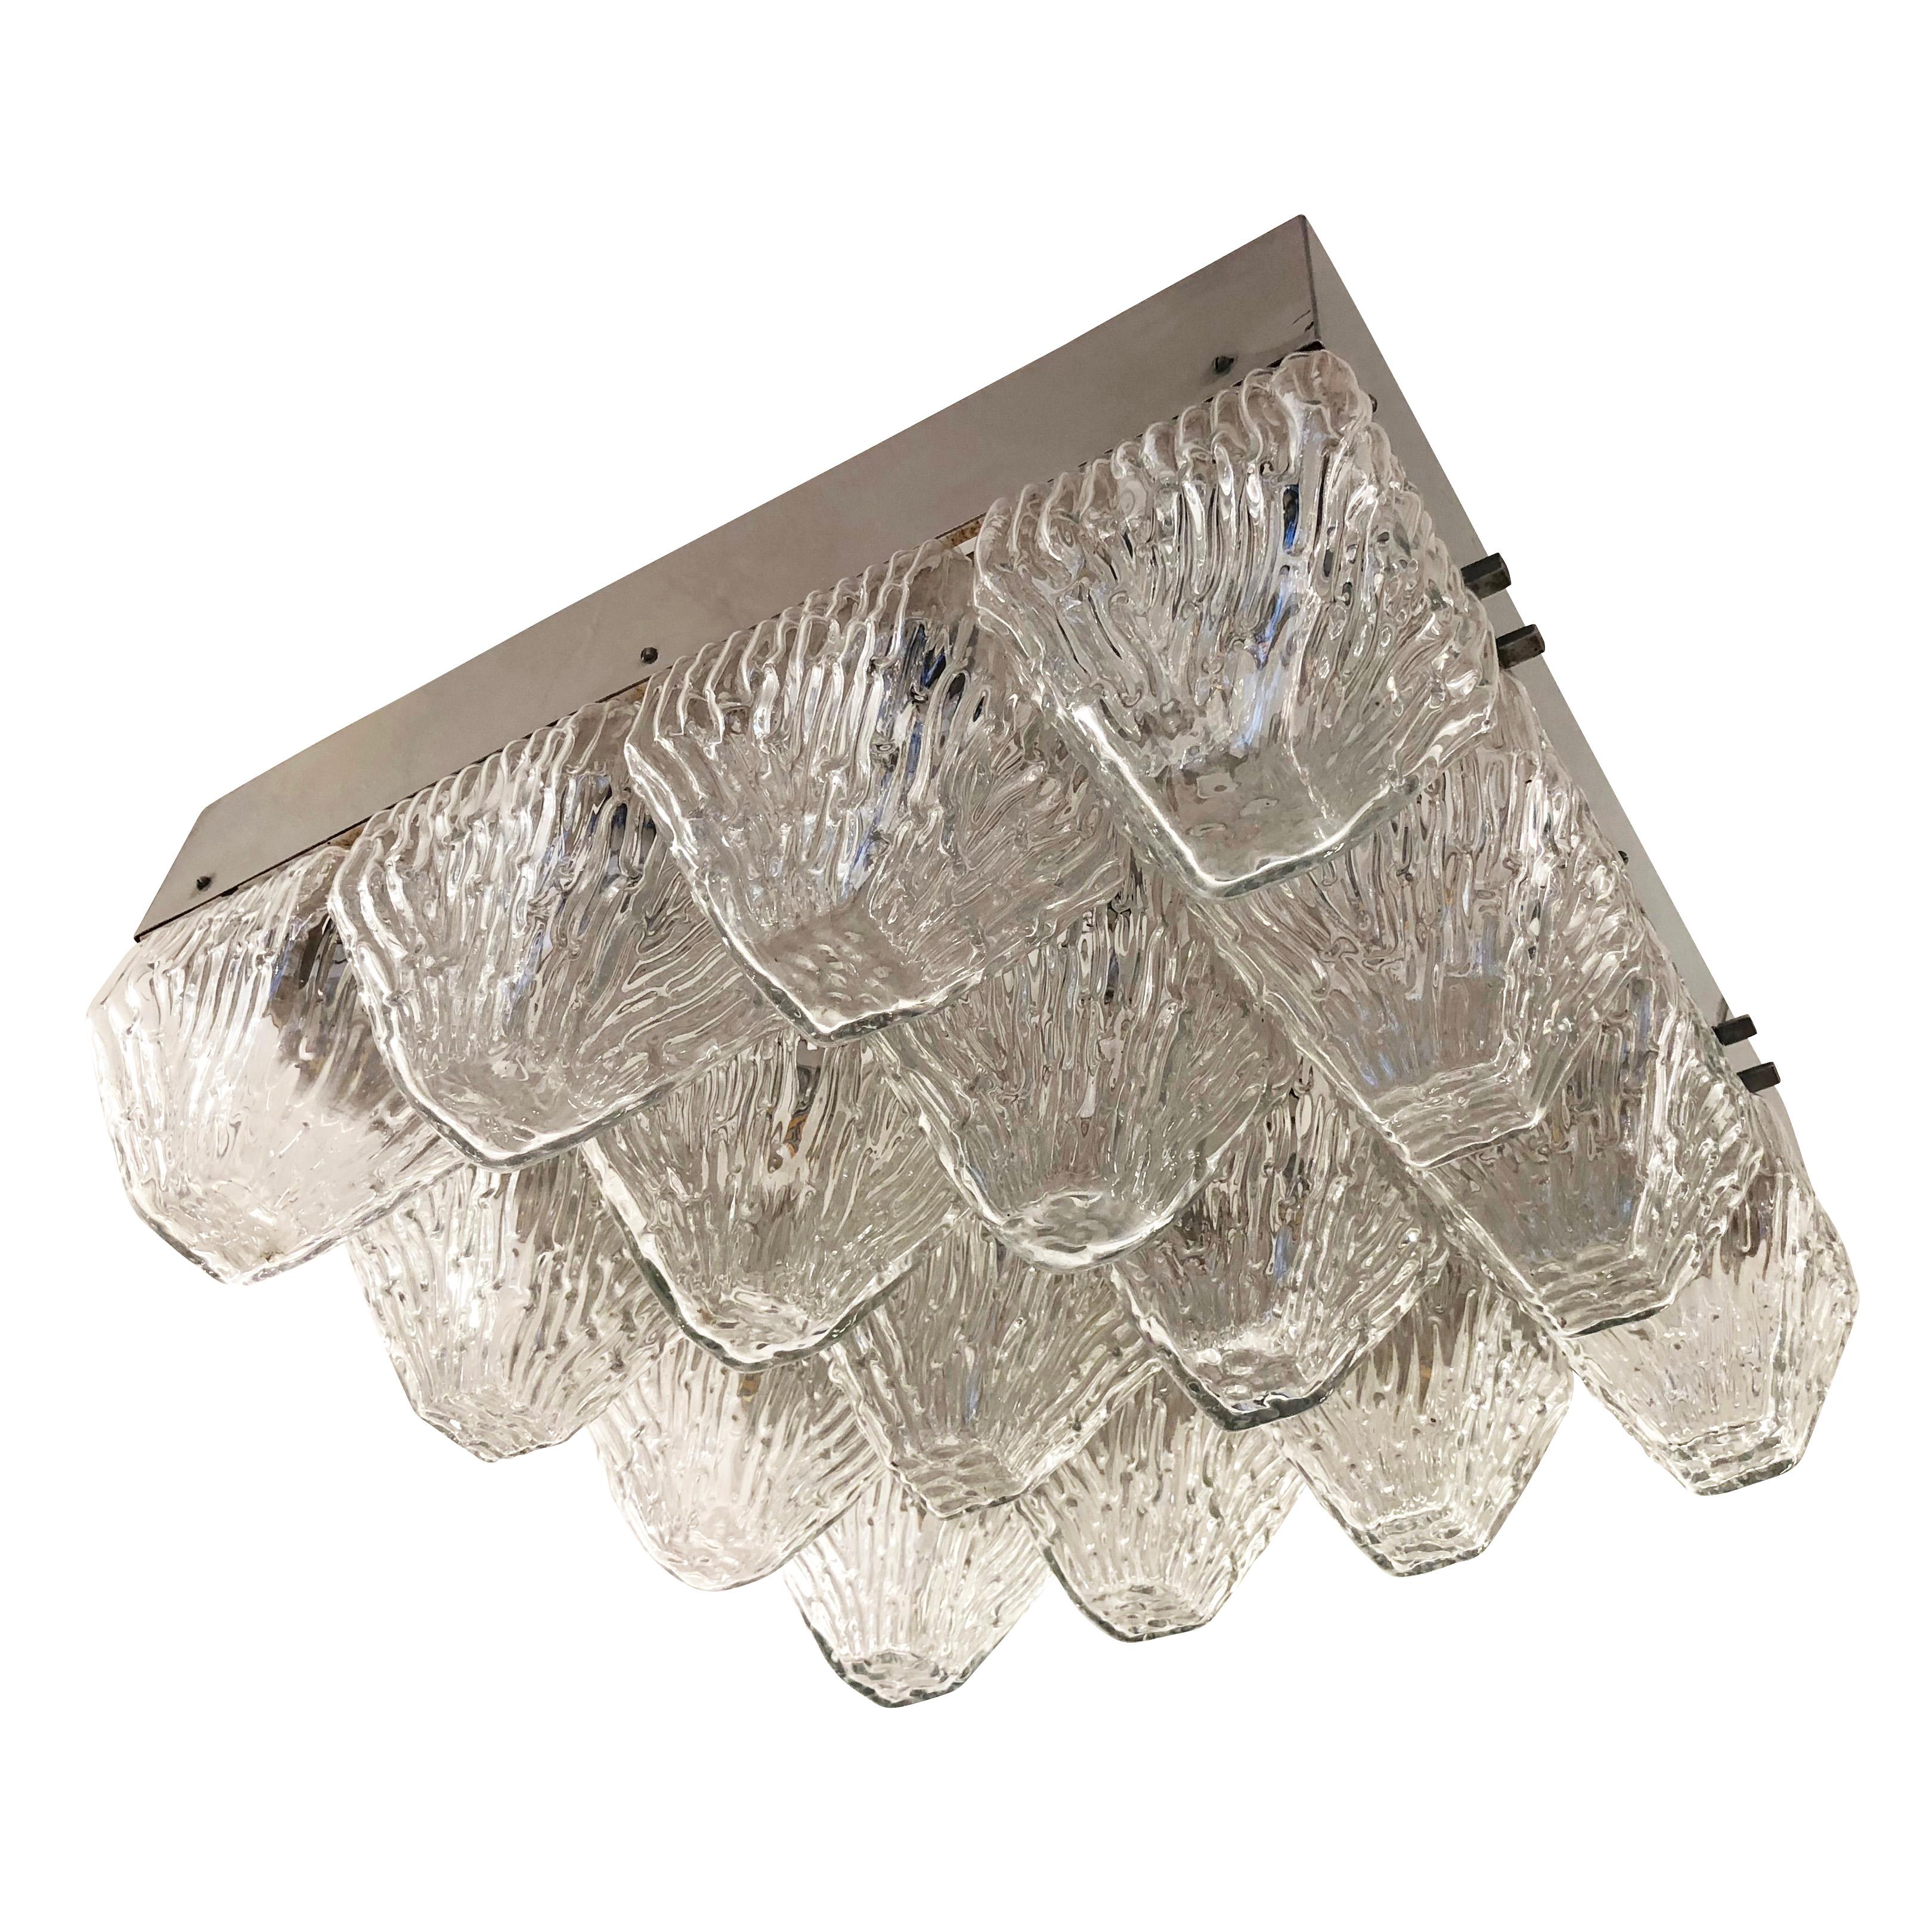 Large midcentury fixture with sixteen textured “pyramid” shaped glasses. Each glass hides one candelabra socket providing an abundant amount of light. Frame is nickel. Originally intended to be hung from two or four points, it can be modified to be